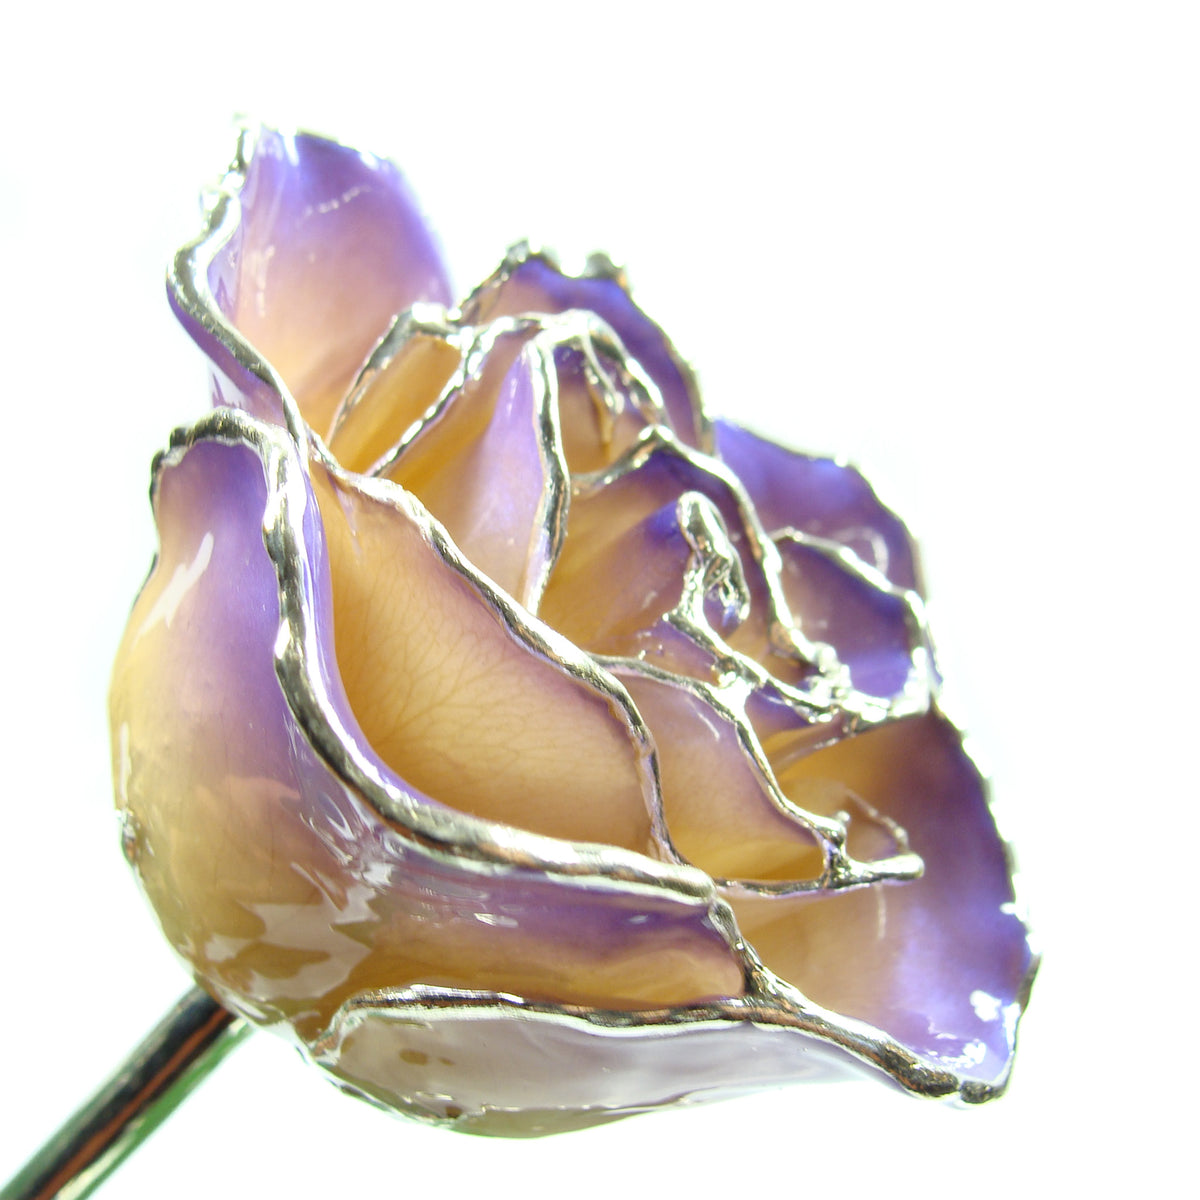 Silver Trimmed Forever Rose with White and Purple Petals. View of Stem, Leaves, and Rose Petals and Showing Detail of Silver Trim